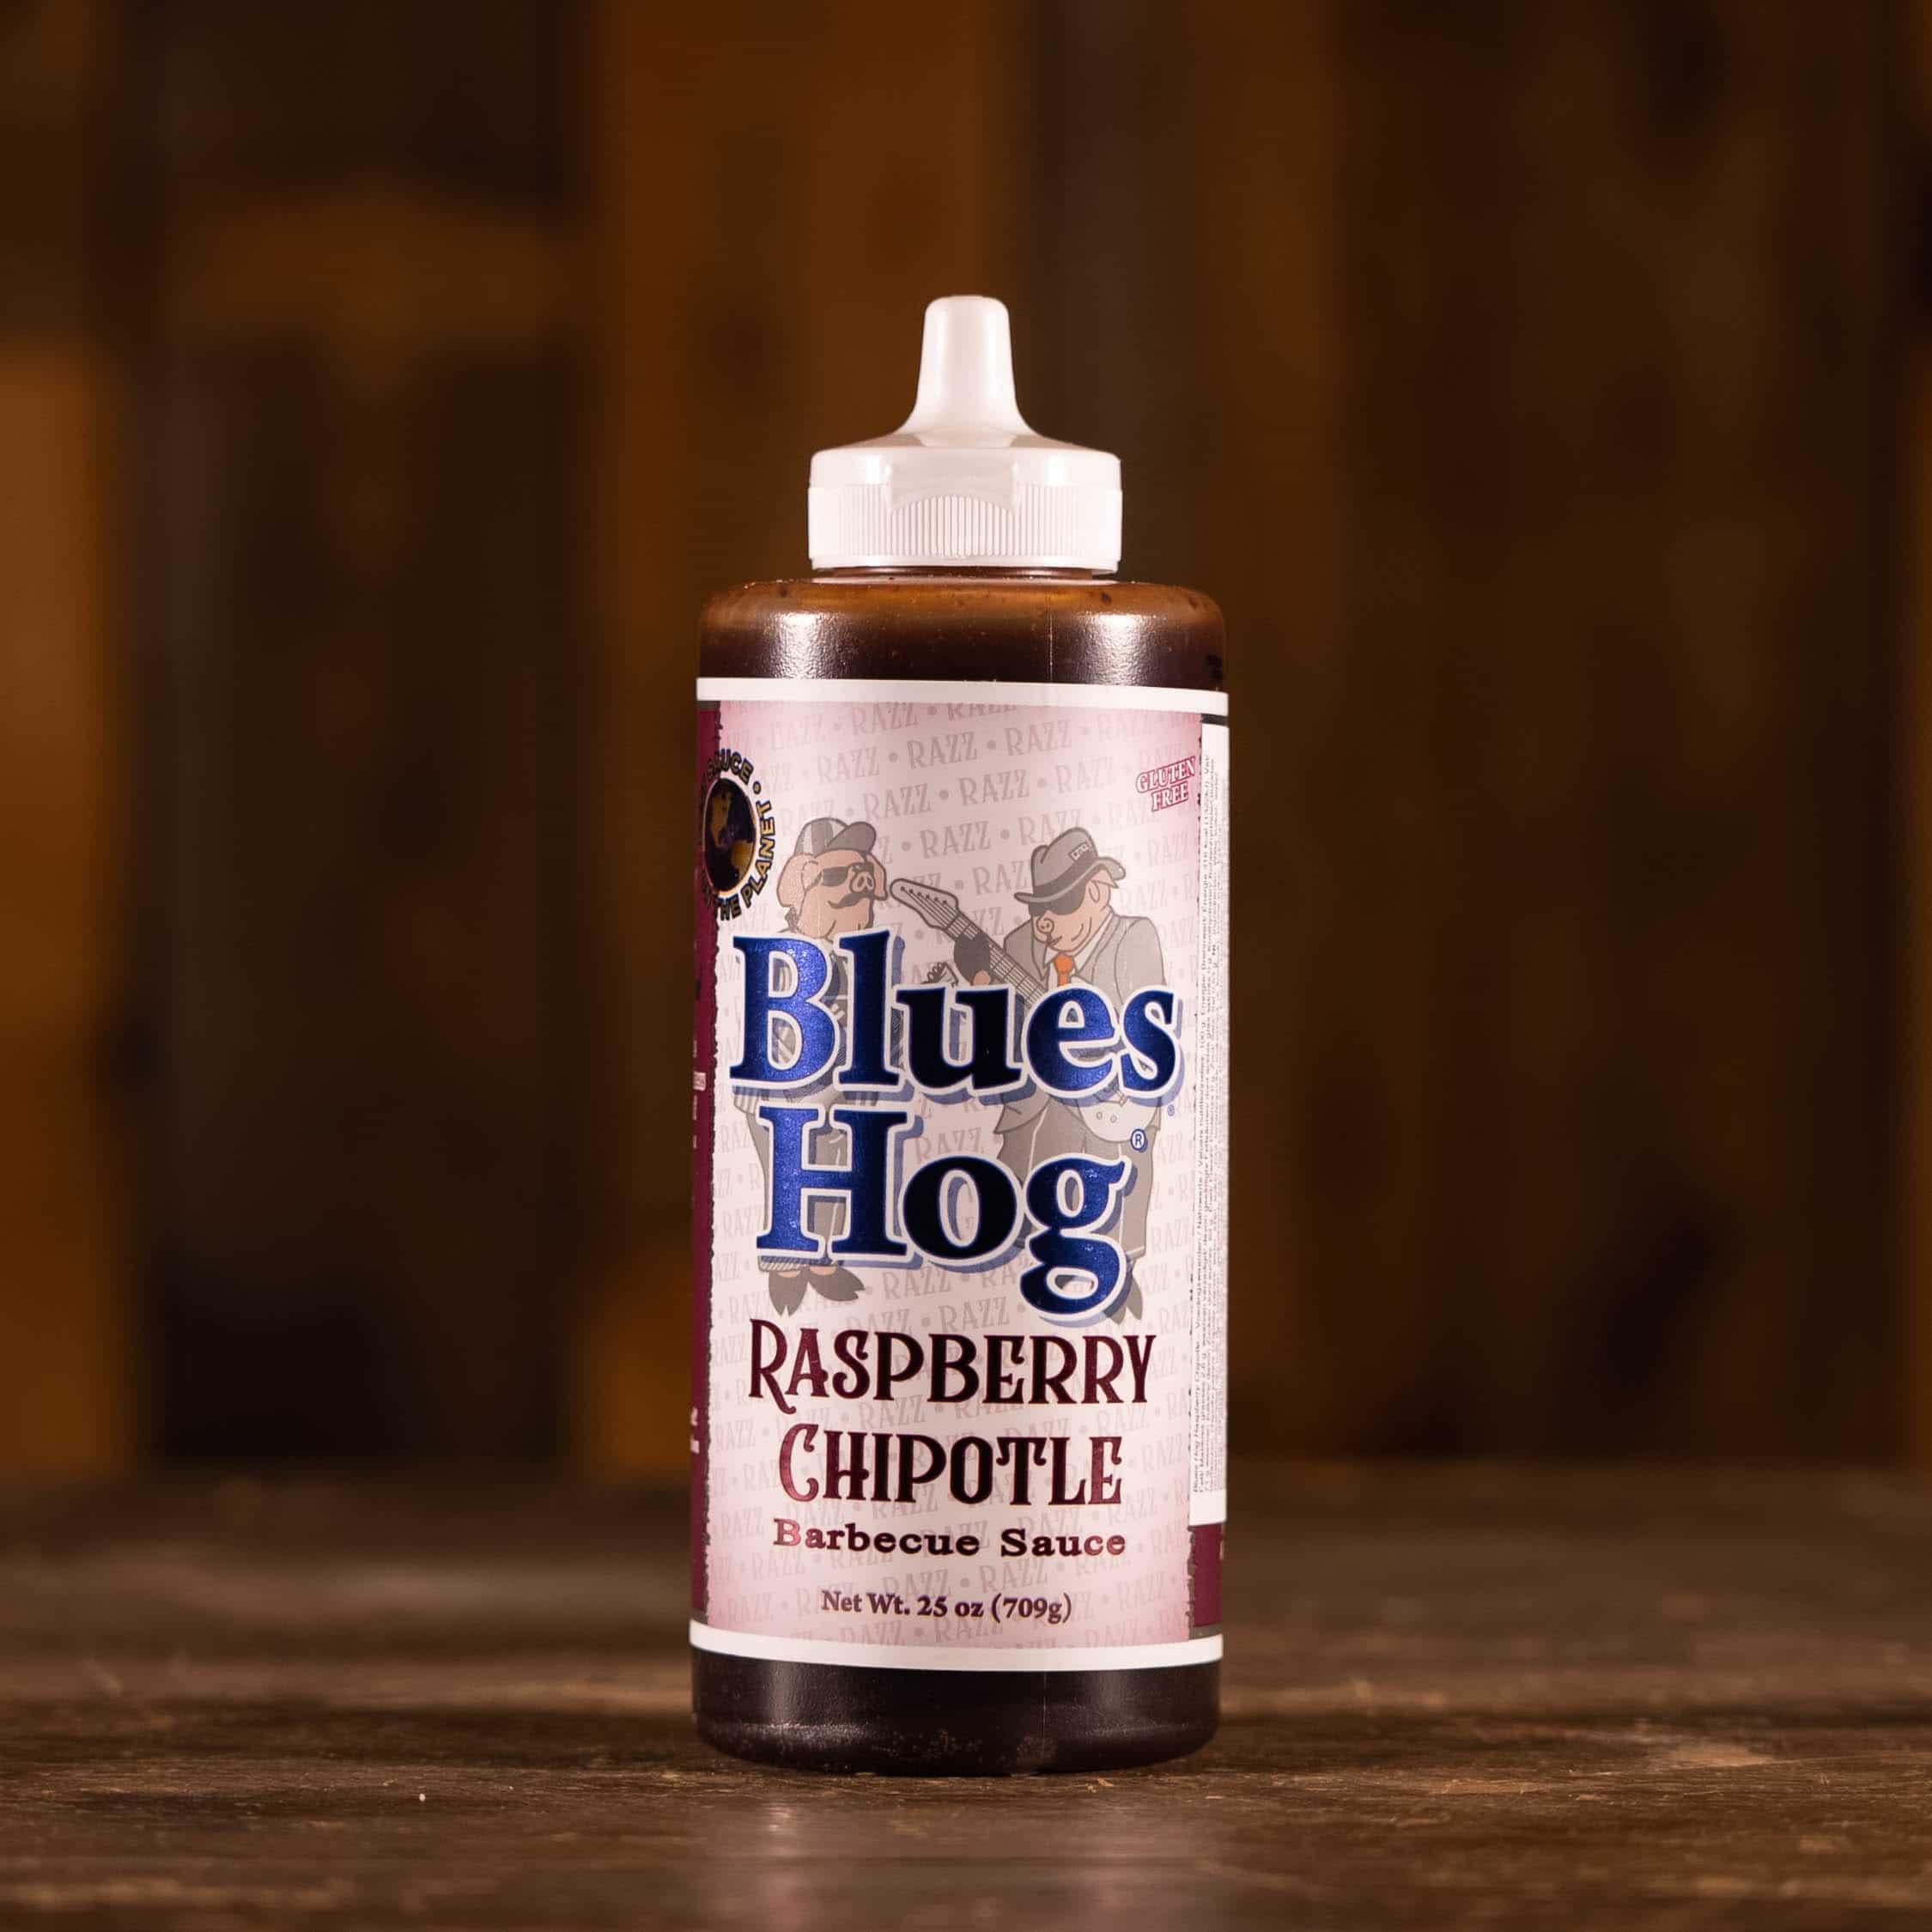 Blues Hog Raspberry Chipotle Barbecue Sauce - Squeeze Bottle